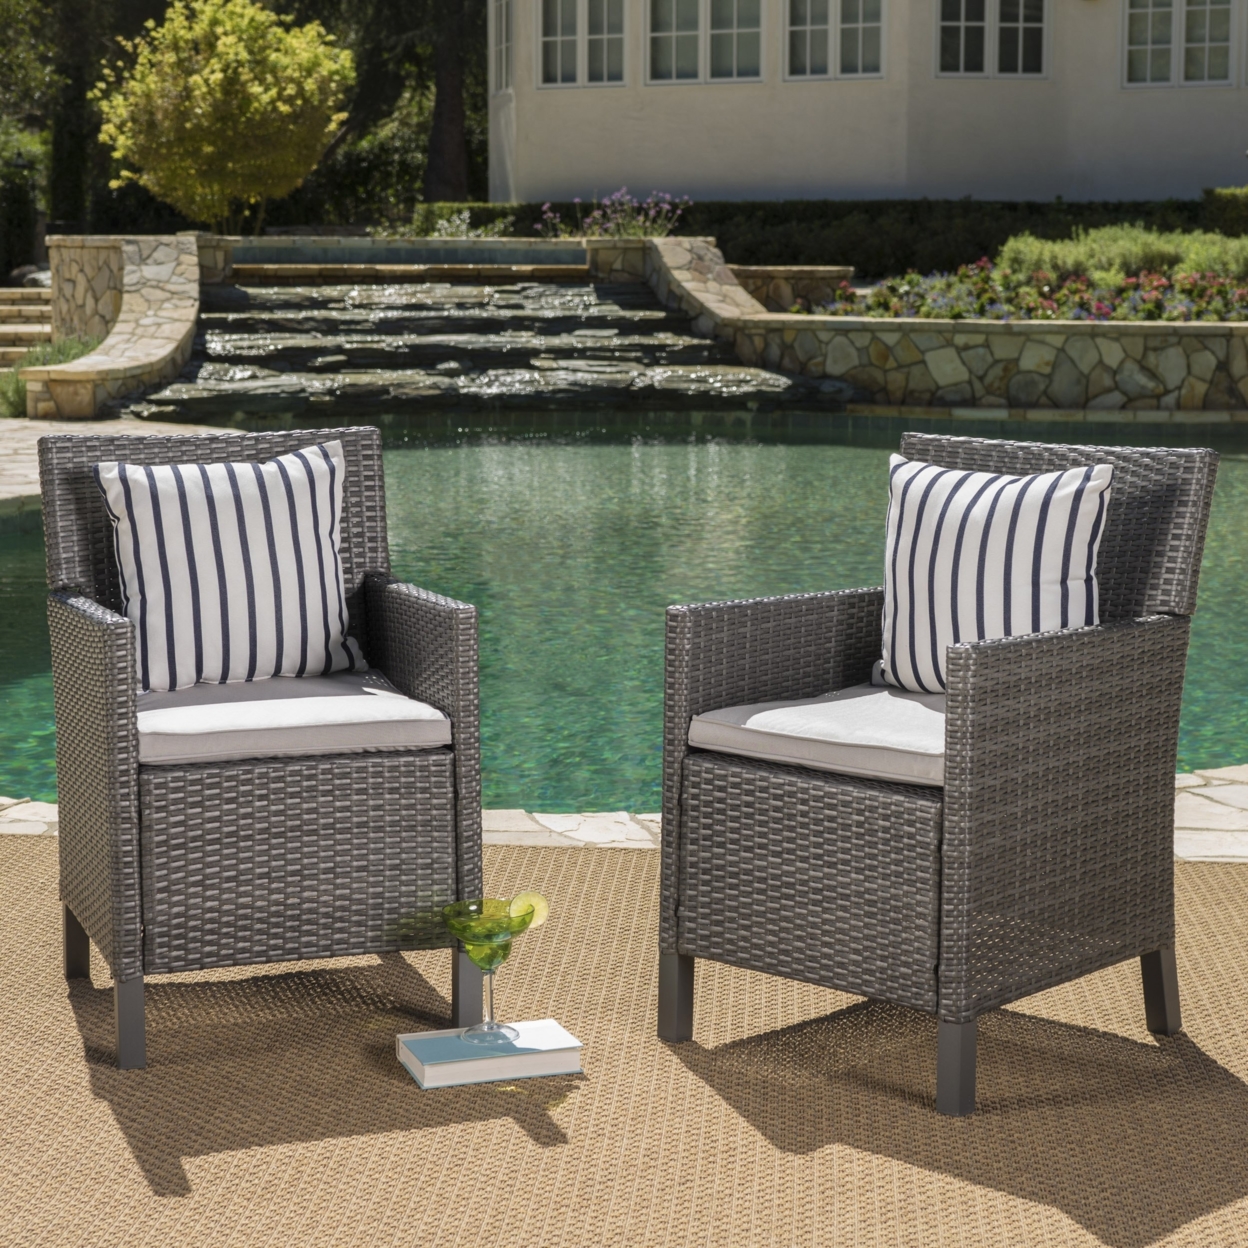 Cyrus Outdoor Wicker Dining Chairs With Water Resistant Cushions (Set Of 2) - Multi-brown, Light Brown